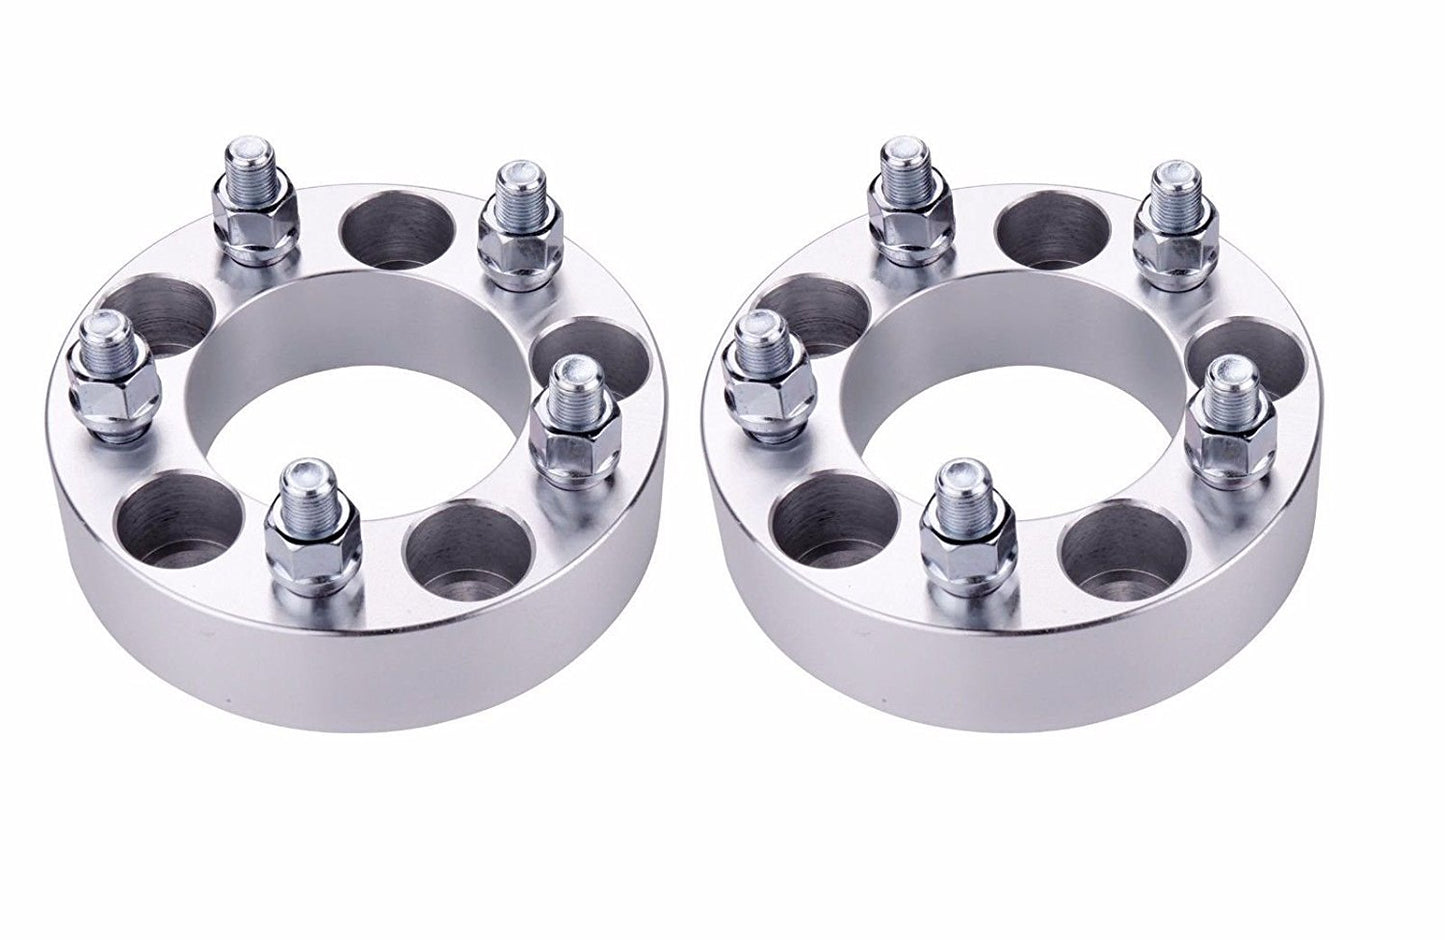 2 pcs 3" 5x4.75 to 5 x 4.75 Wheel Spacers Adapters | 12x1.5 Threads 3"